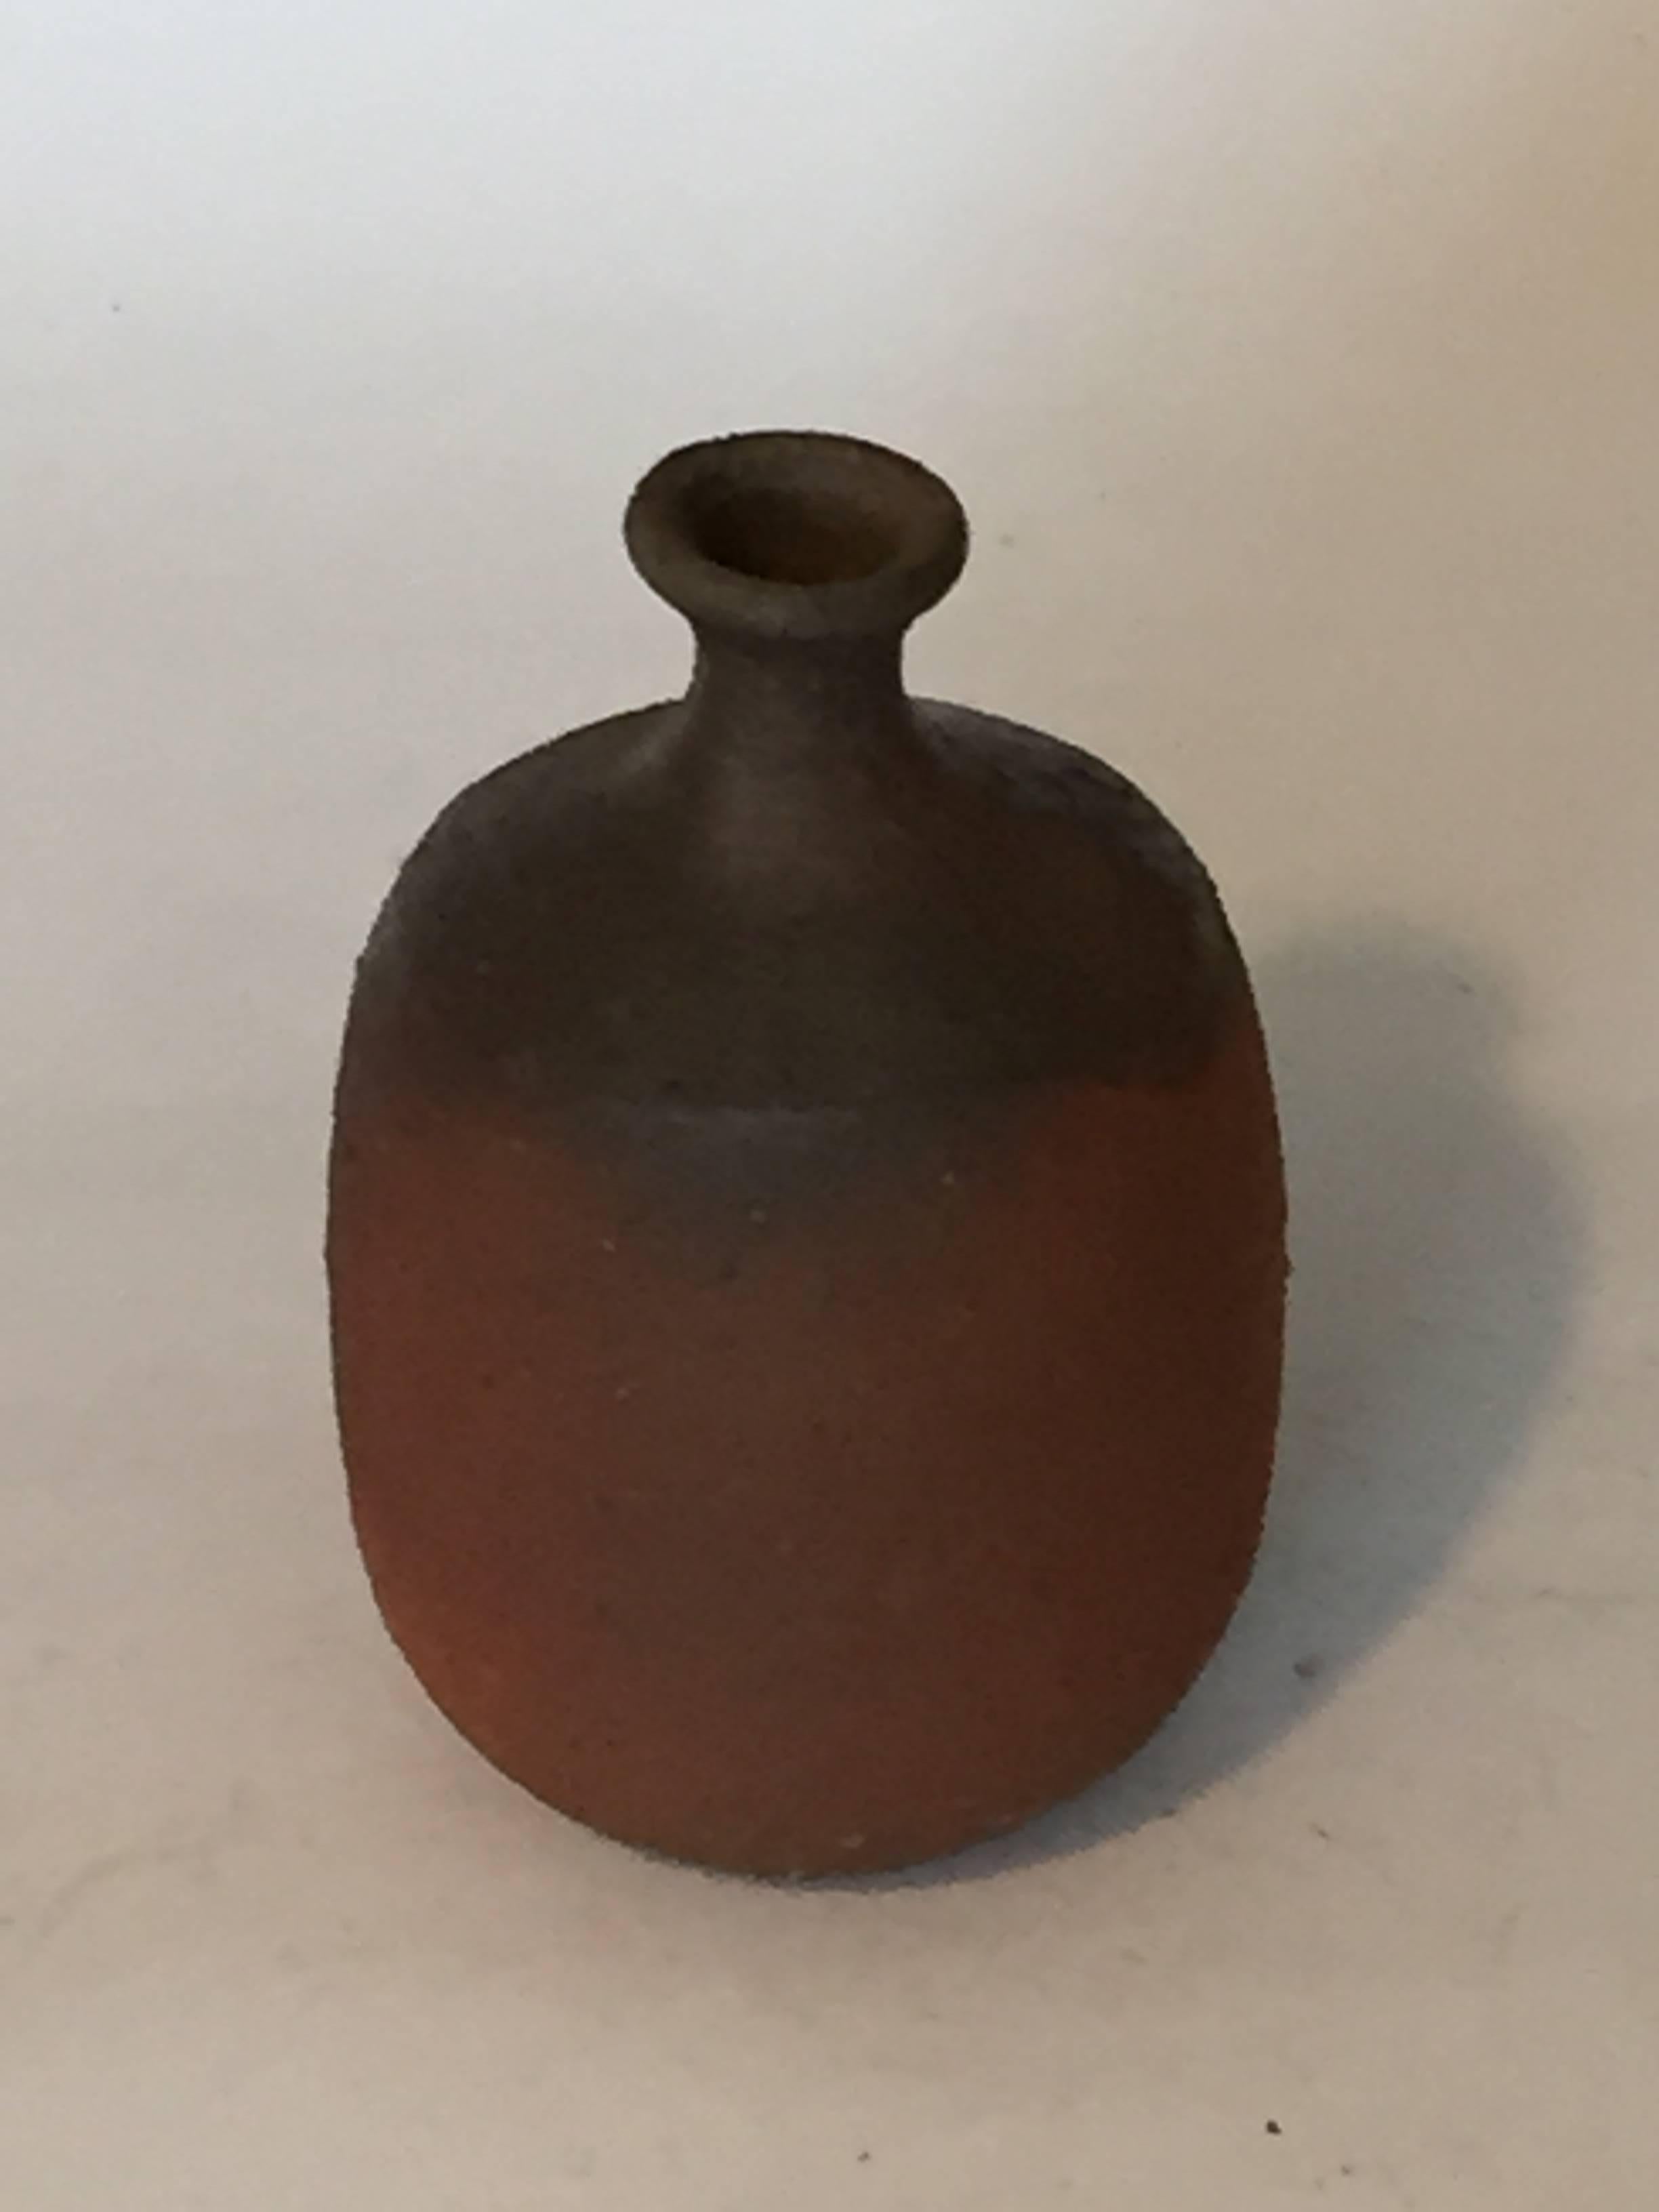 A wonderful 20th century sake bottle by Toshu Yamamoto (1906-1994).

Toshu Yamamoto was born in Inbe, Bizen City, and became a National Living Treasure in 1987. Trained under artists such as Yaichi Kasube, he was a master of the pottery wheel.